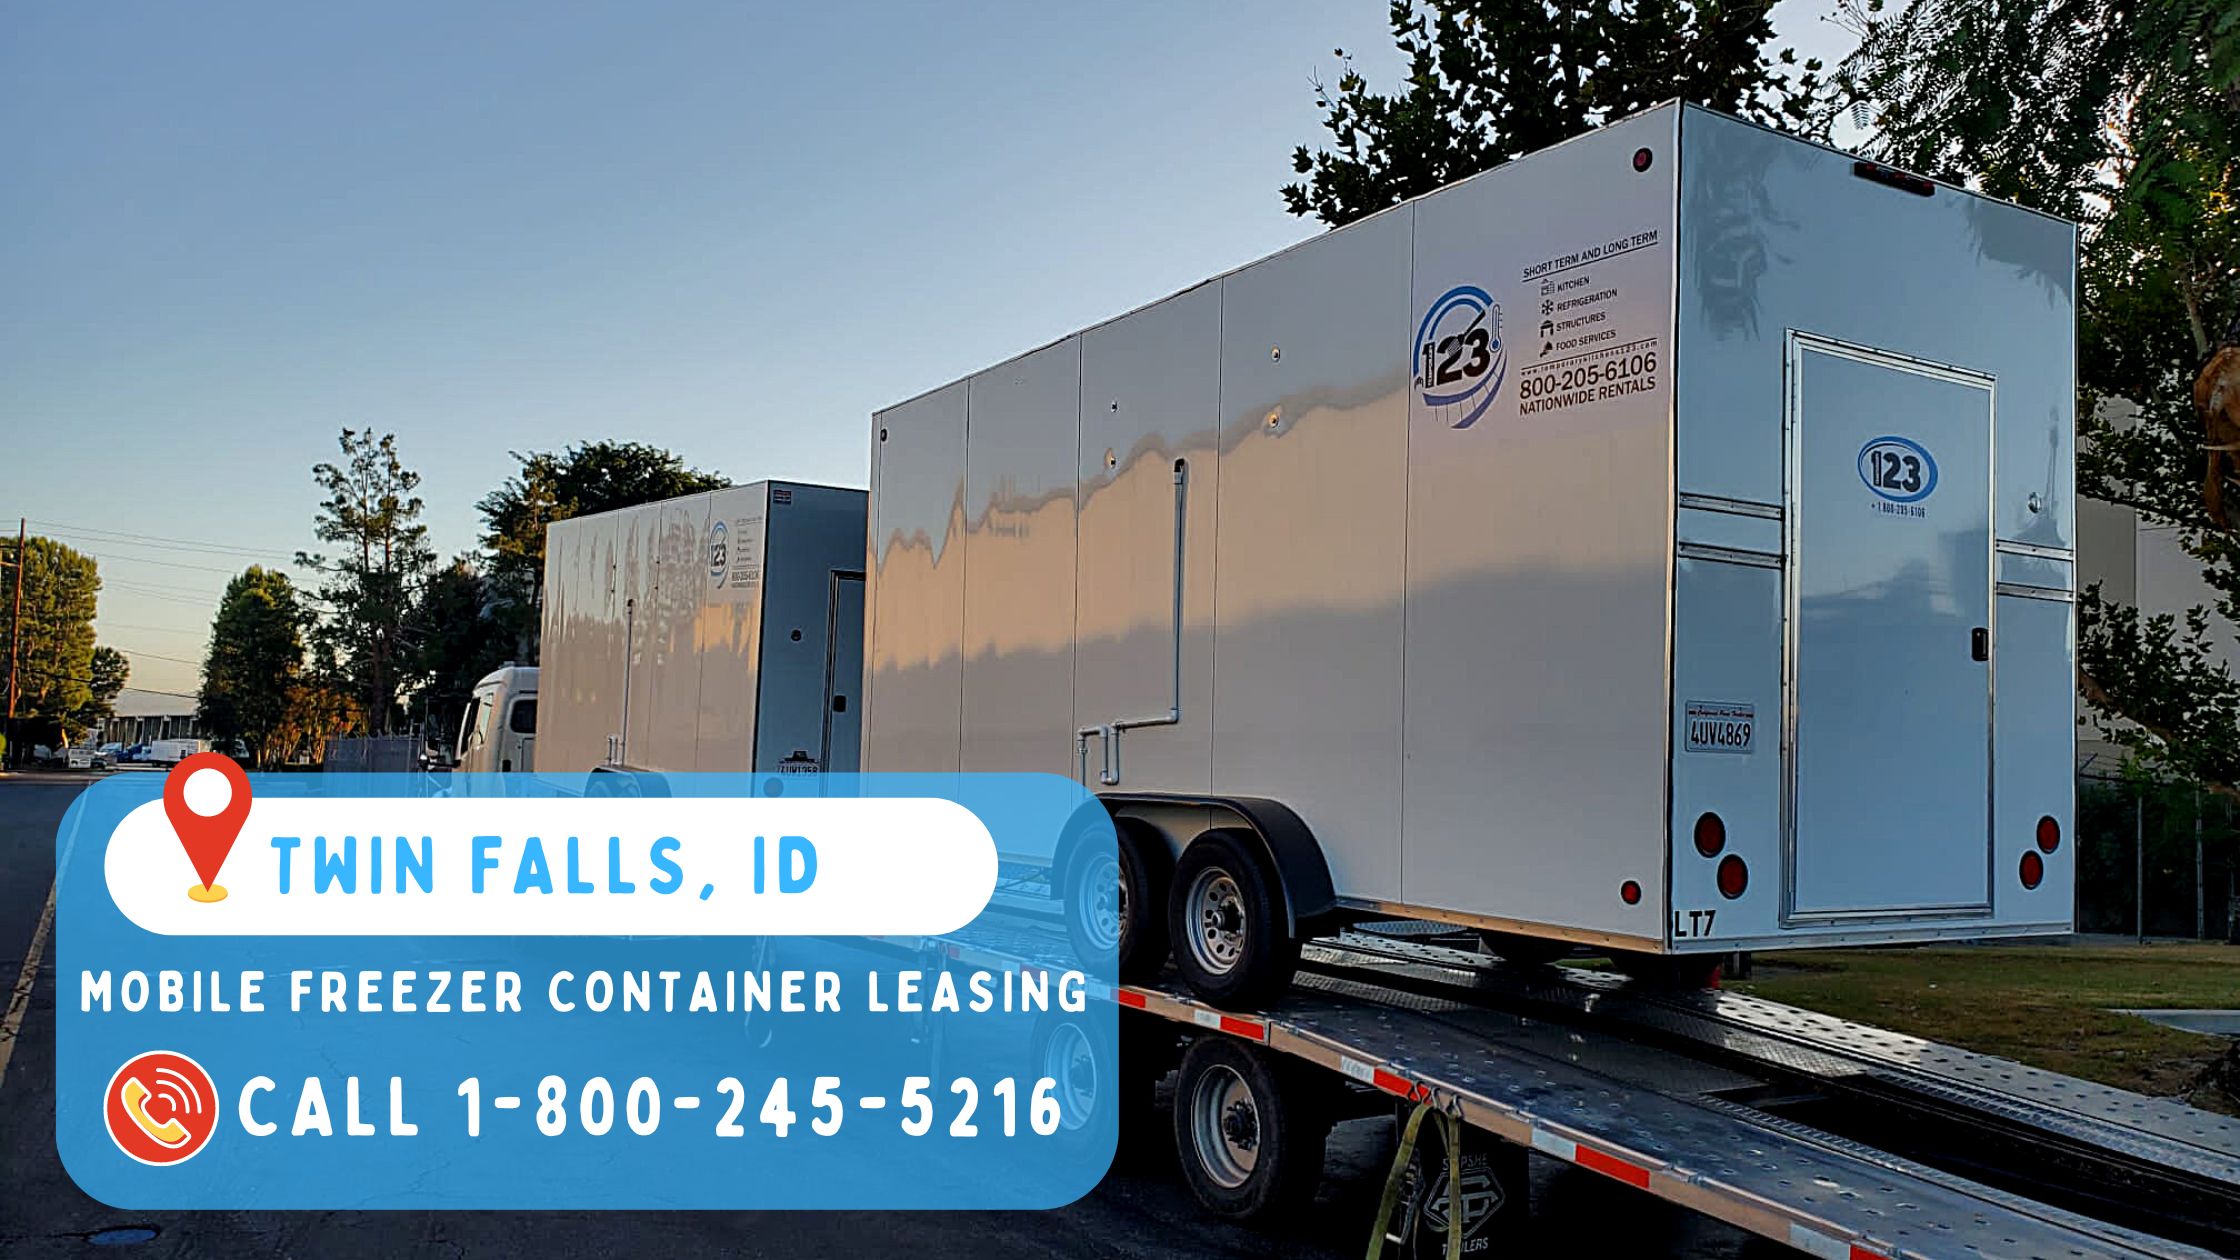 Mobile Freezer Container Leasing in Twin Falls, ID